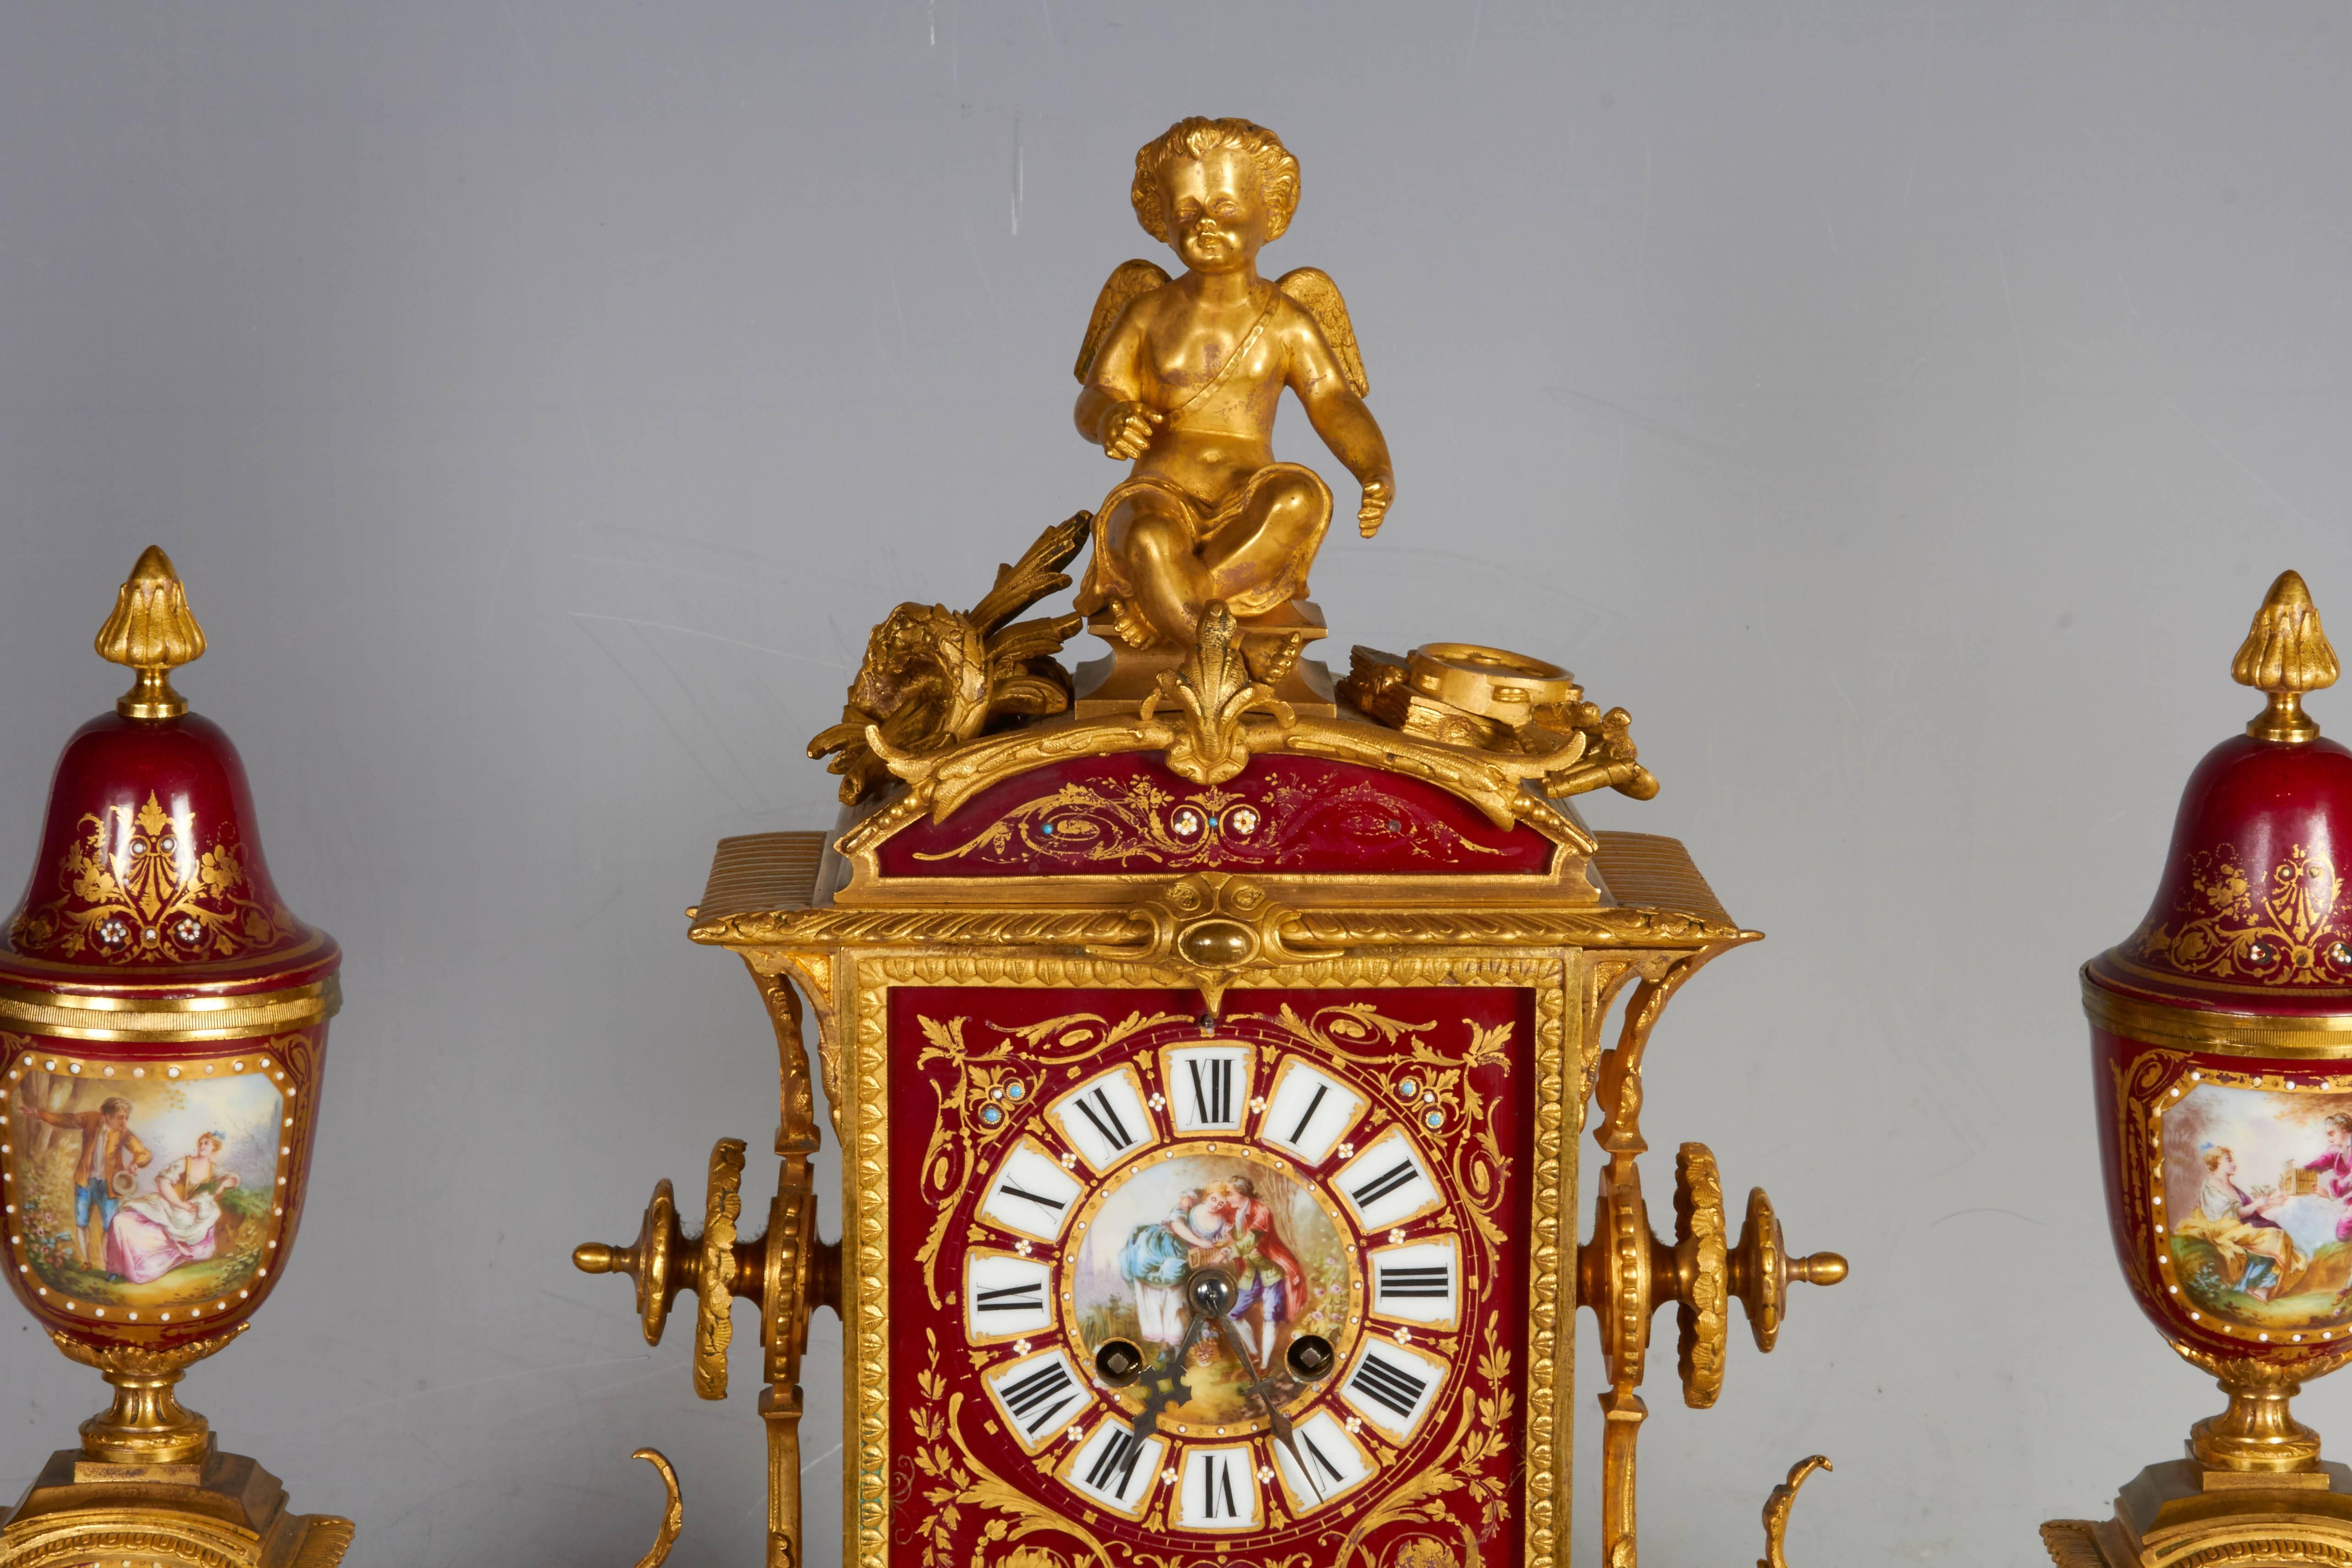 A very fine antique French ormolu-mounted Sevres style ruby ground, jeweled and enameled, three-piece clock garniture, each finely painted with Watteau scenes with lovers in landscapes and scenes galantes within 24-karat gold and raised jeweled